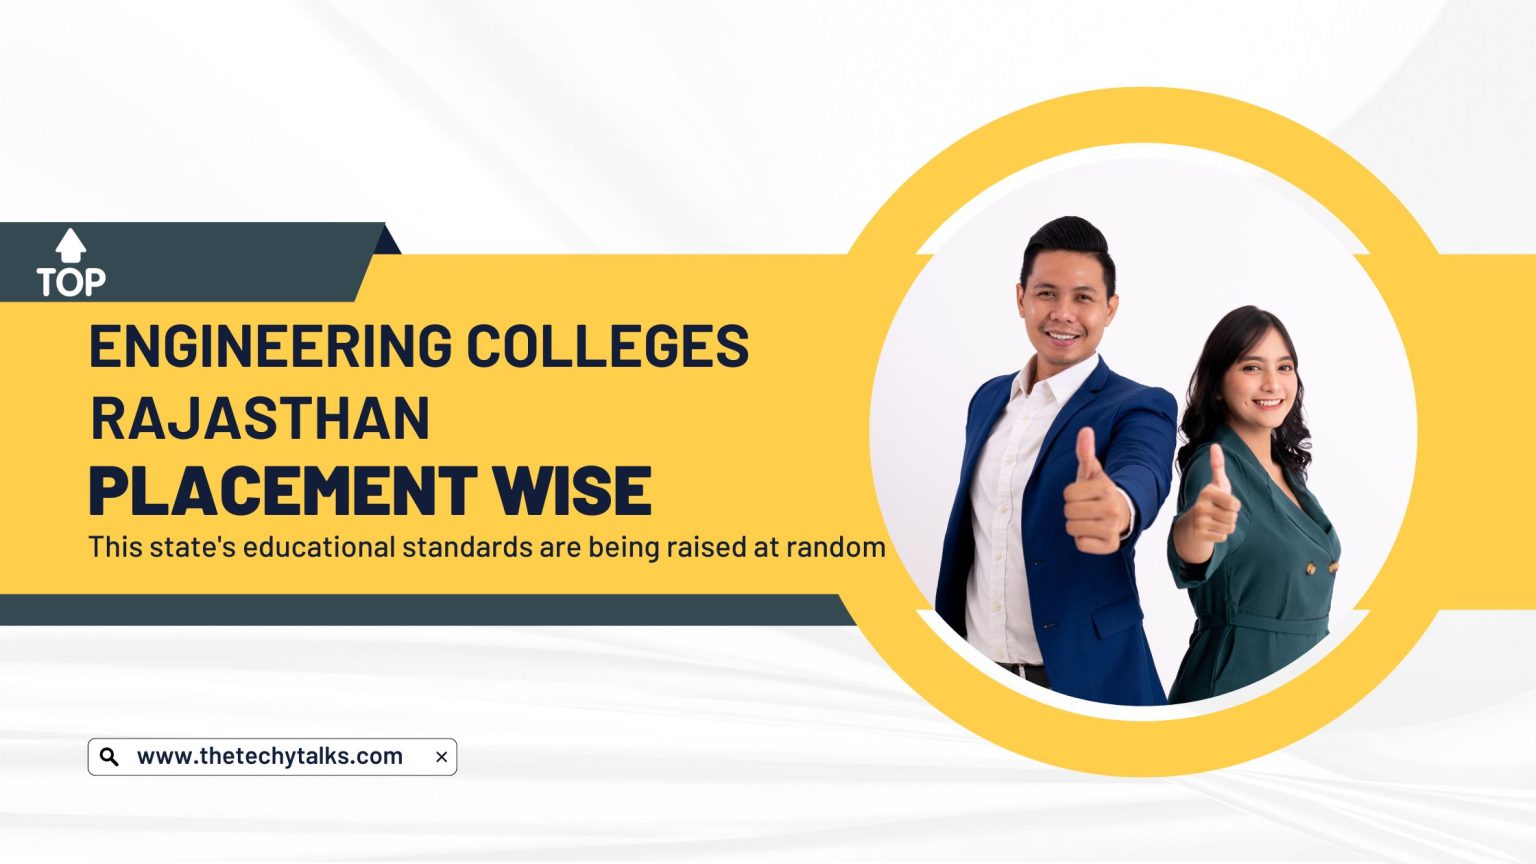 Top 10 Engineering Colleges in Rajasthan Placement Wise